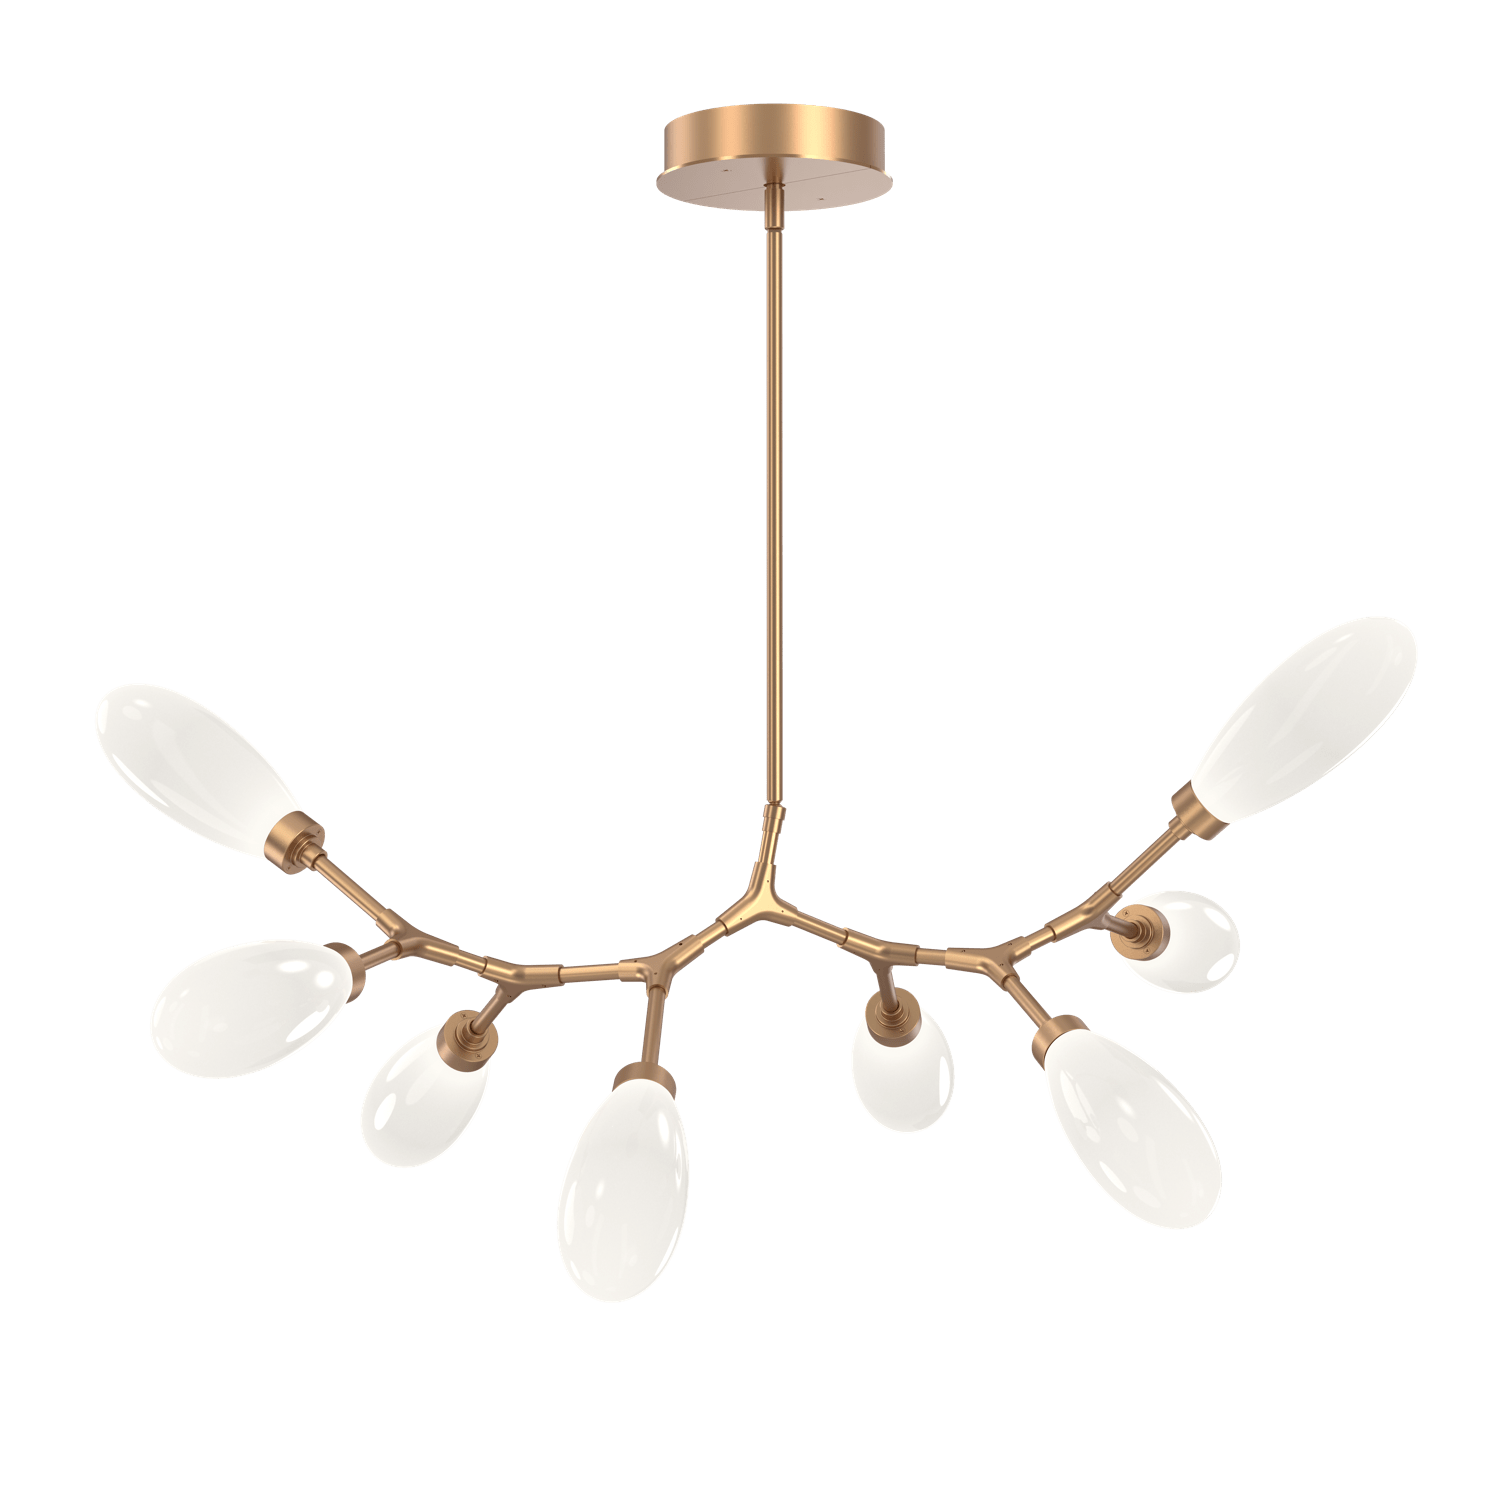 PLB0071-BB-NB-WL-LL-Hammerton-Studio-Fiori-8-light-organic-branch-chandelier-with-novel-brass-finish-and-opal-white-glass-shades-and-LED-lamping